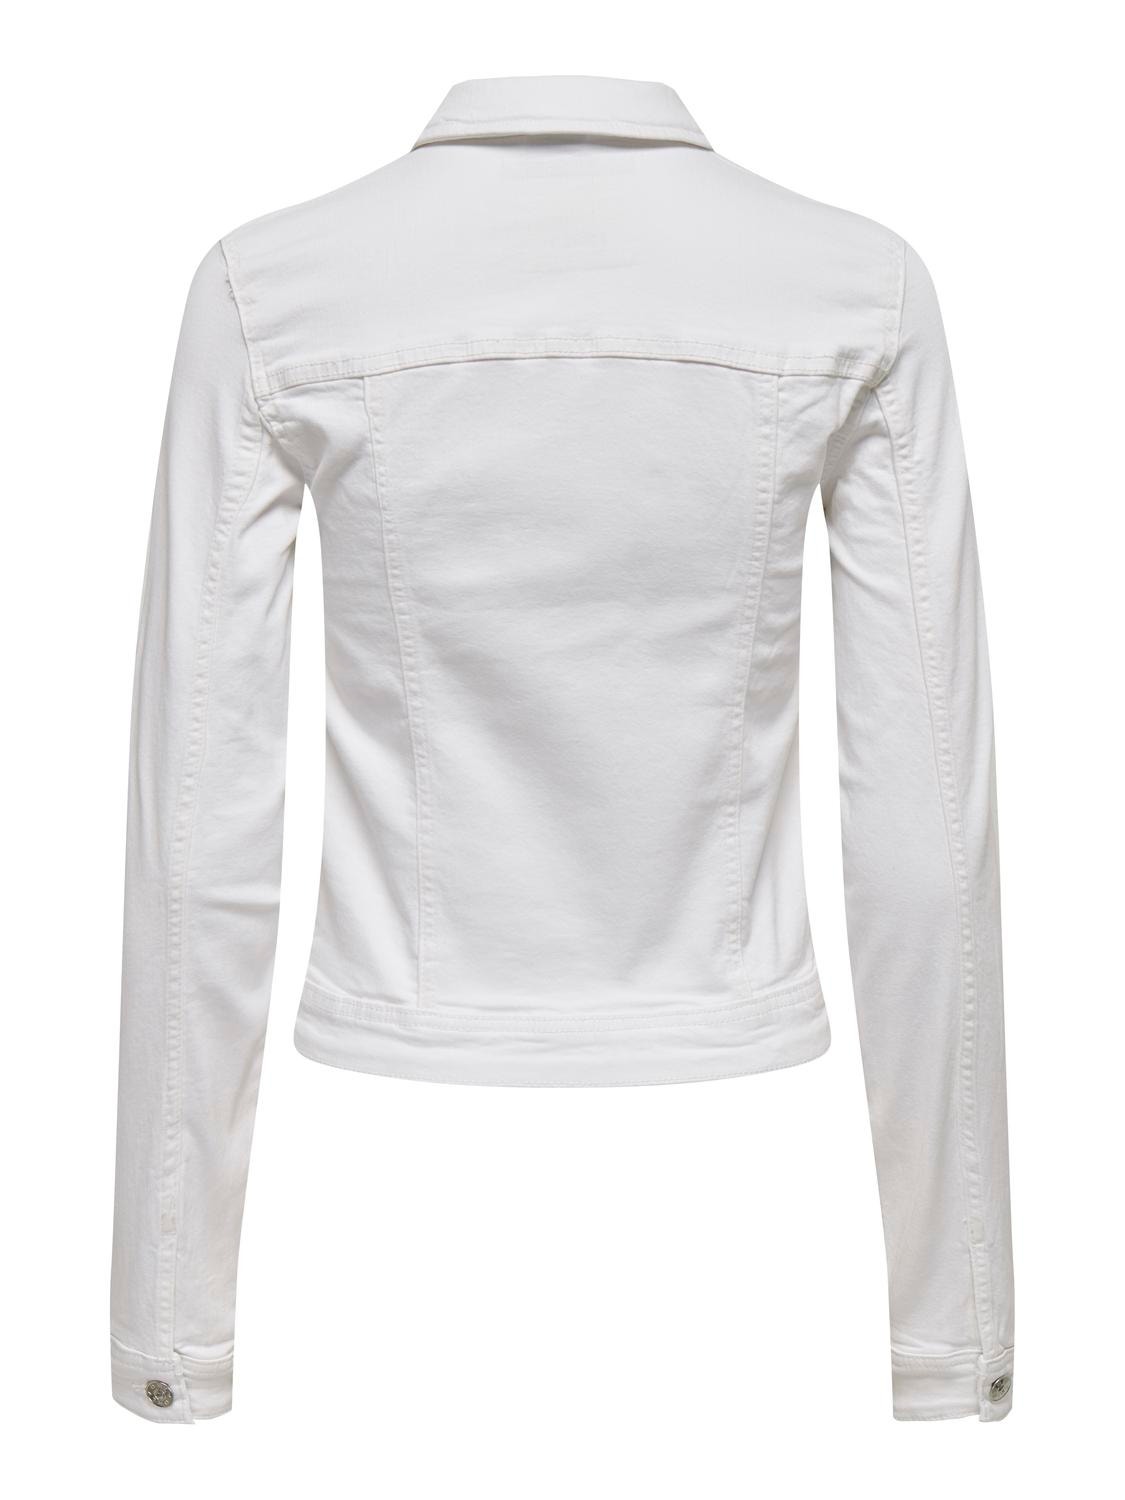 ONLY Jacket -White - 15232150